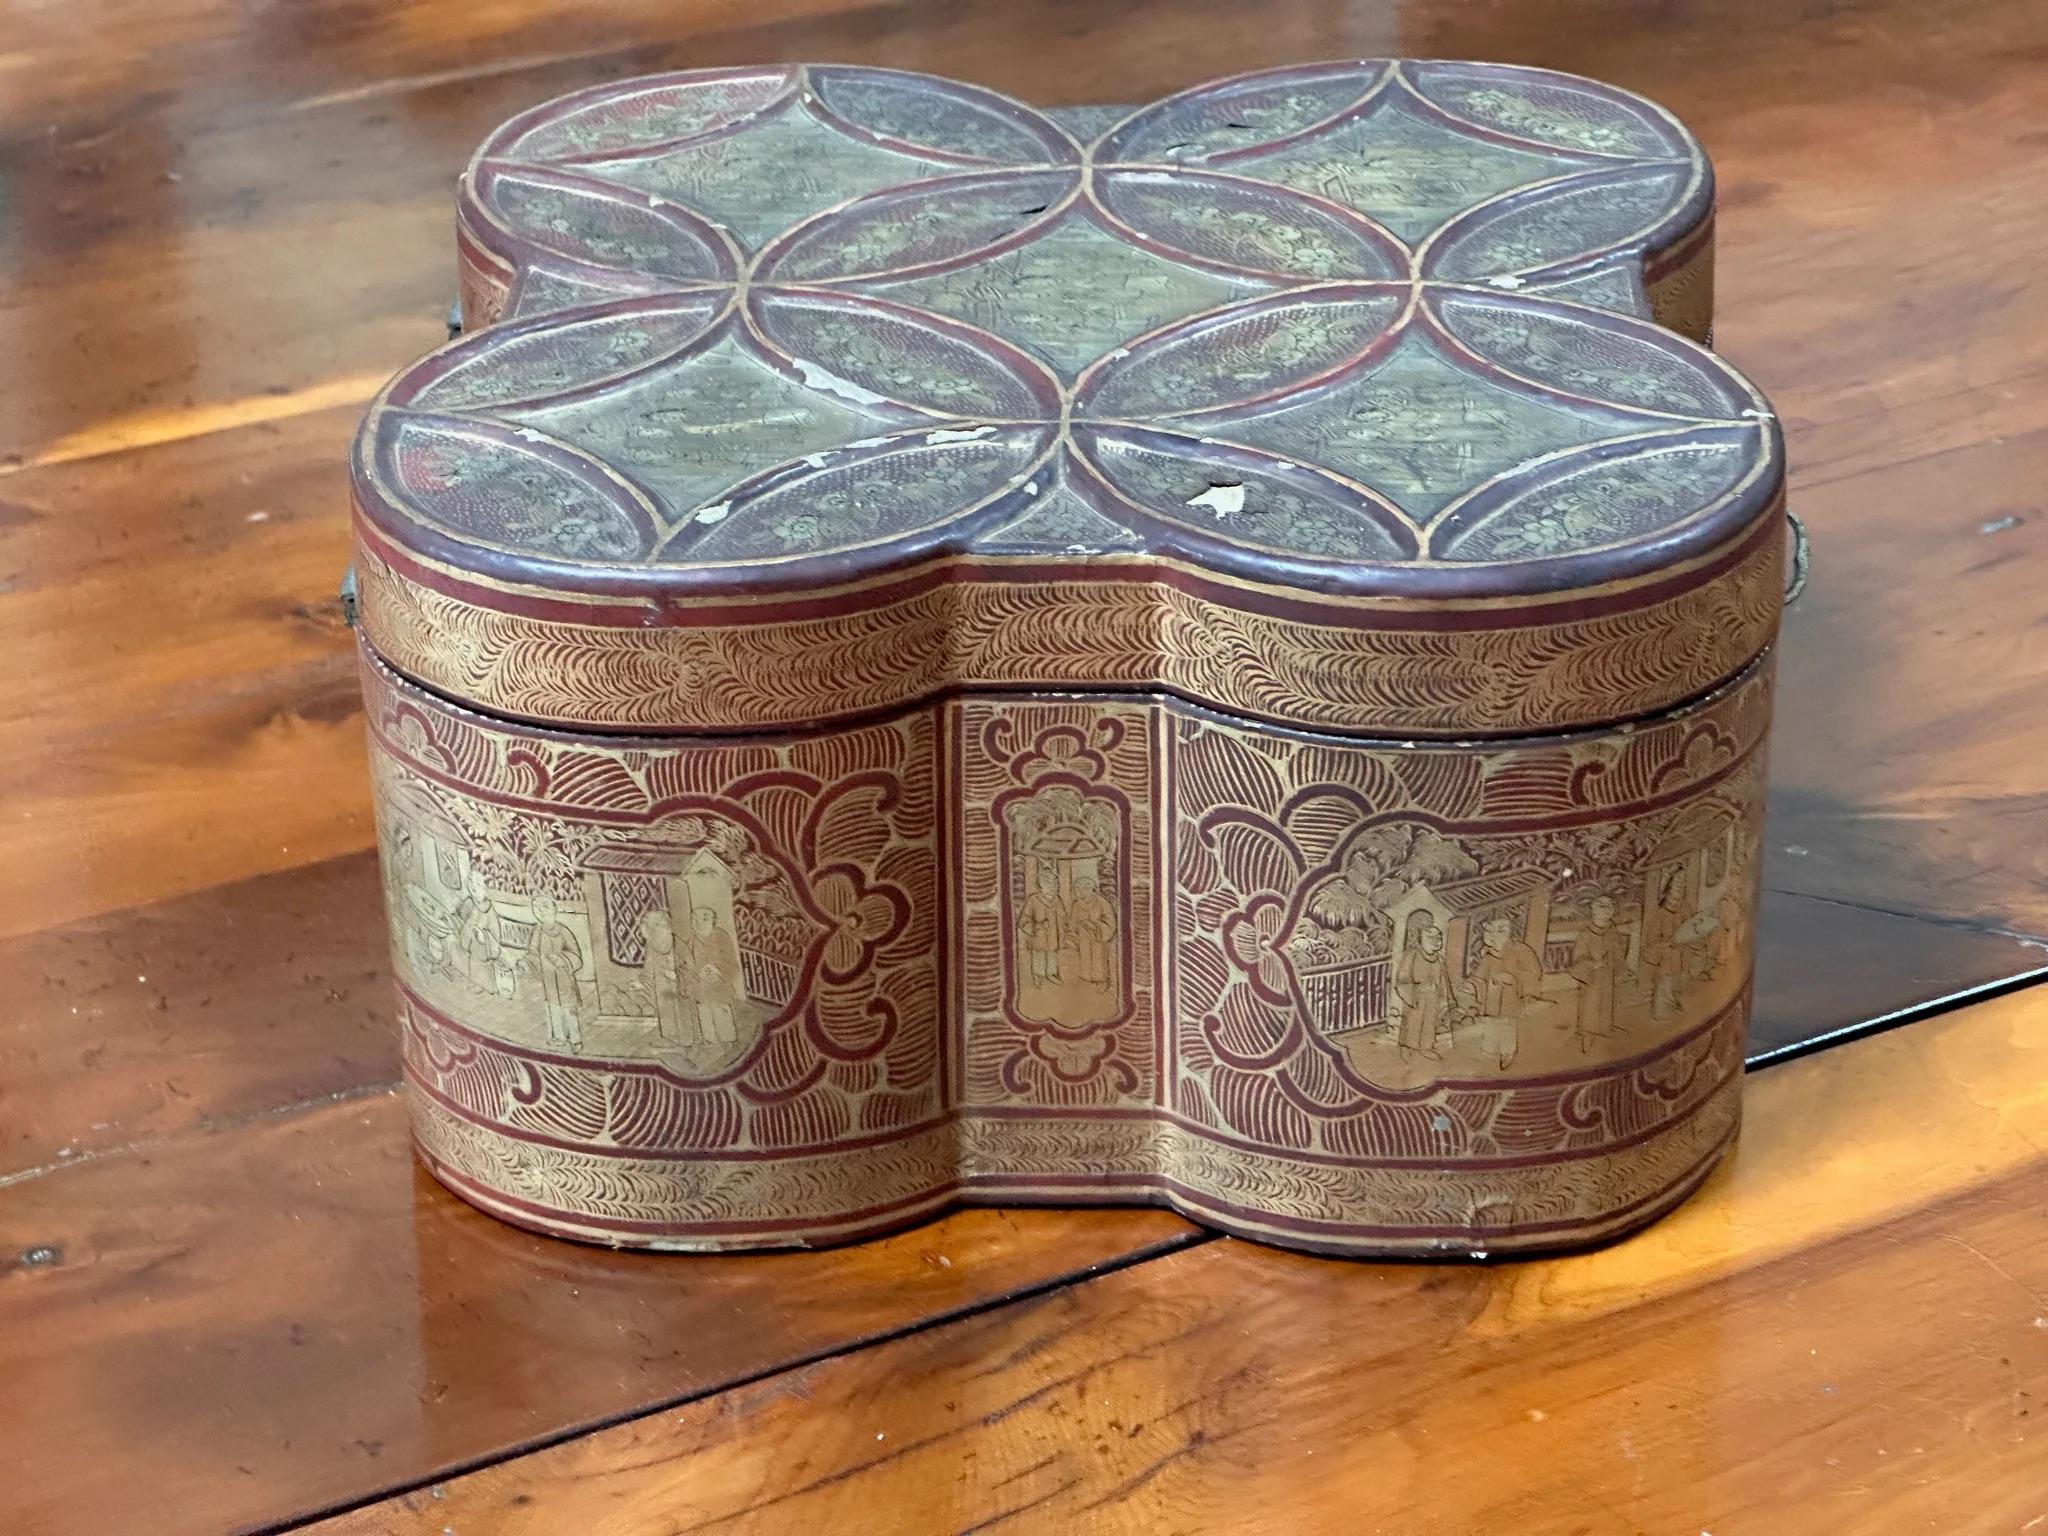 Rare quatrefoil Chinese Export Tea Caddy, 19th Century, the lacquer tea caddy with interlocking circles design, in deep red, black, and gilt with internal pewter container with bone handle, engraved top surface, lock and key..  
